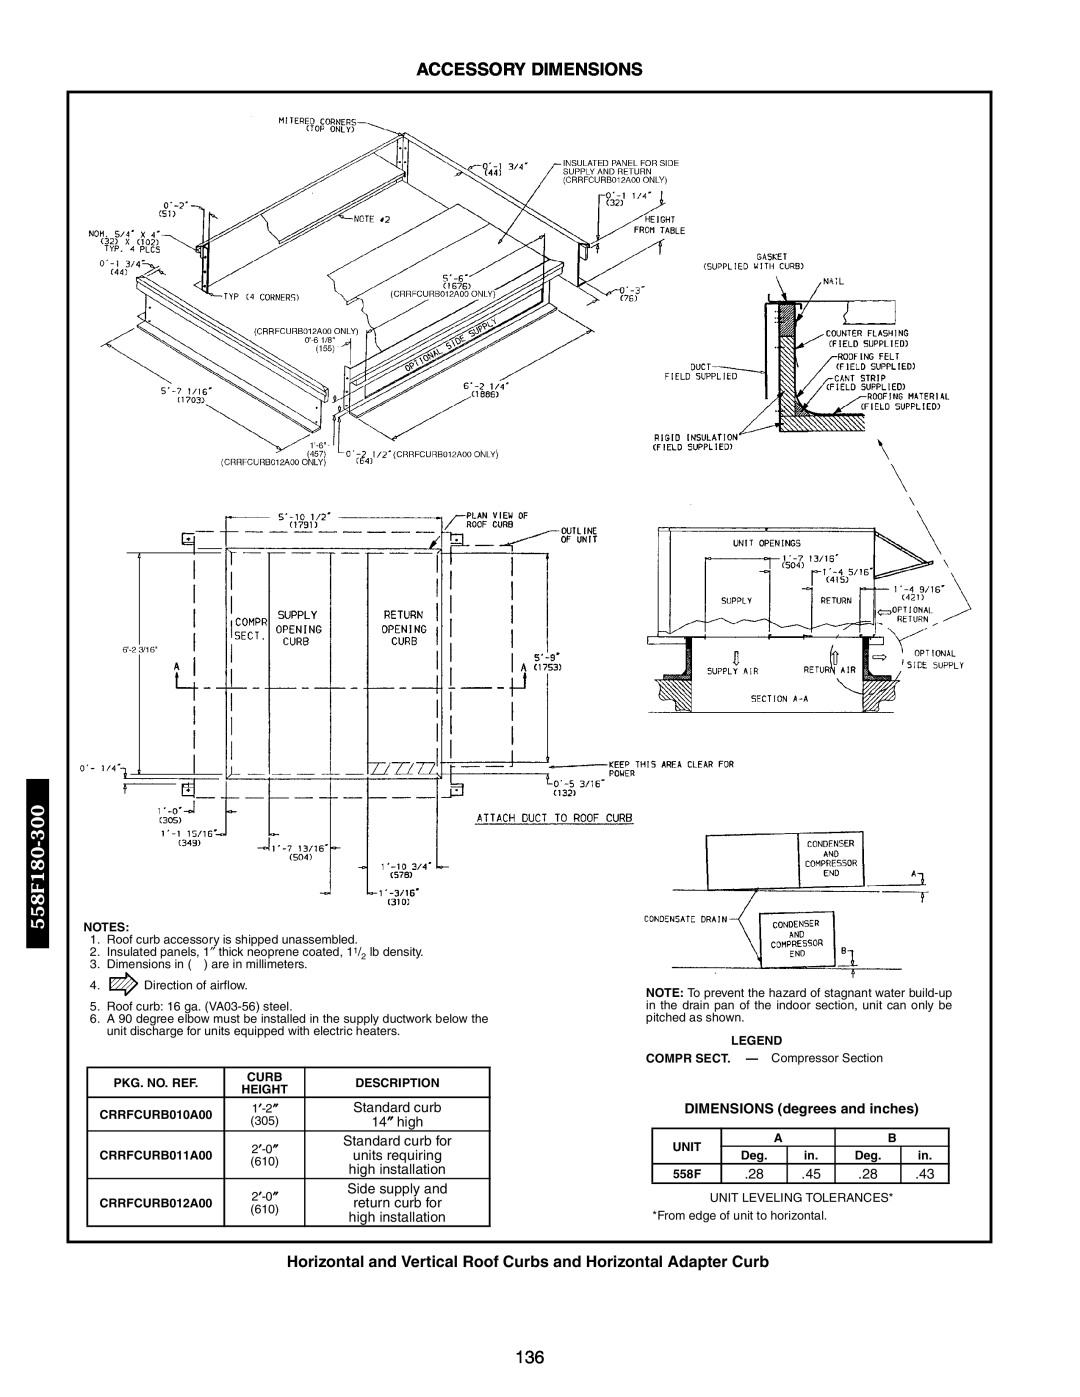 Bryant 551B, 551A manual Accessory Dimensions, 558F180-300, Horizontal and Vertical Roof Curbs and Horizontal Adapter Curb 